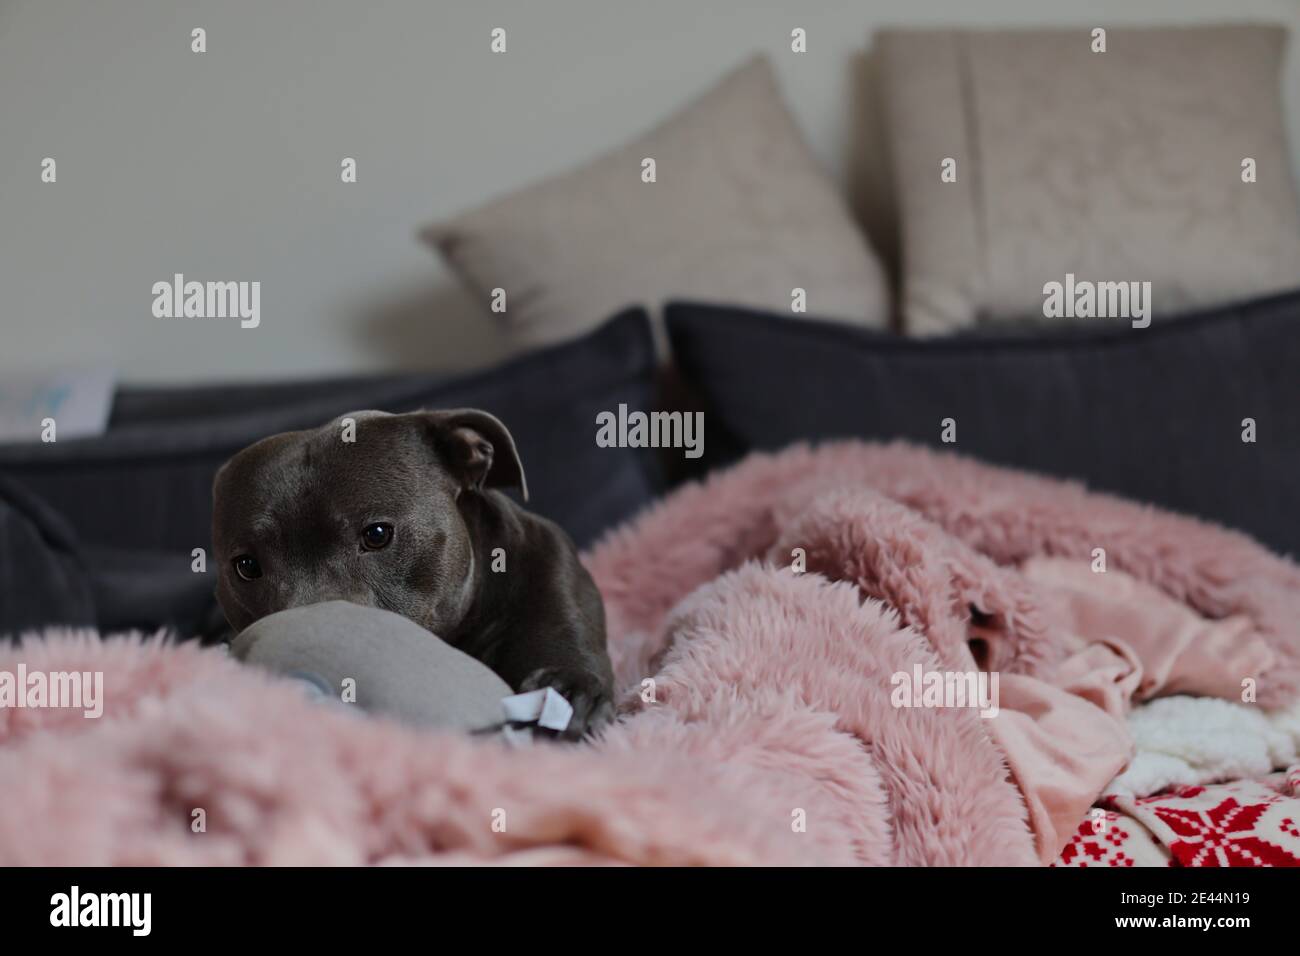 Staffordshire Bull Terrier with its Adorable Look while Lying Down on Sofa with Pink Fluffy Blanket. Cute Staff Bull on Couch. Stock Photo